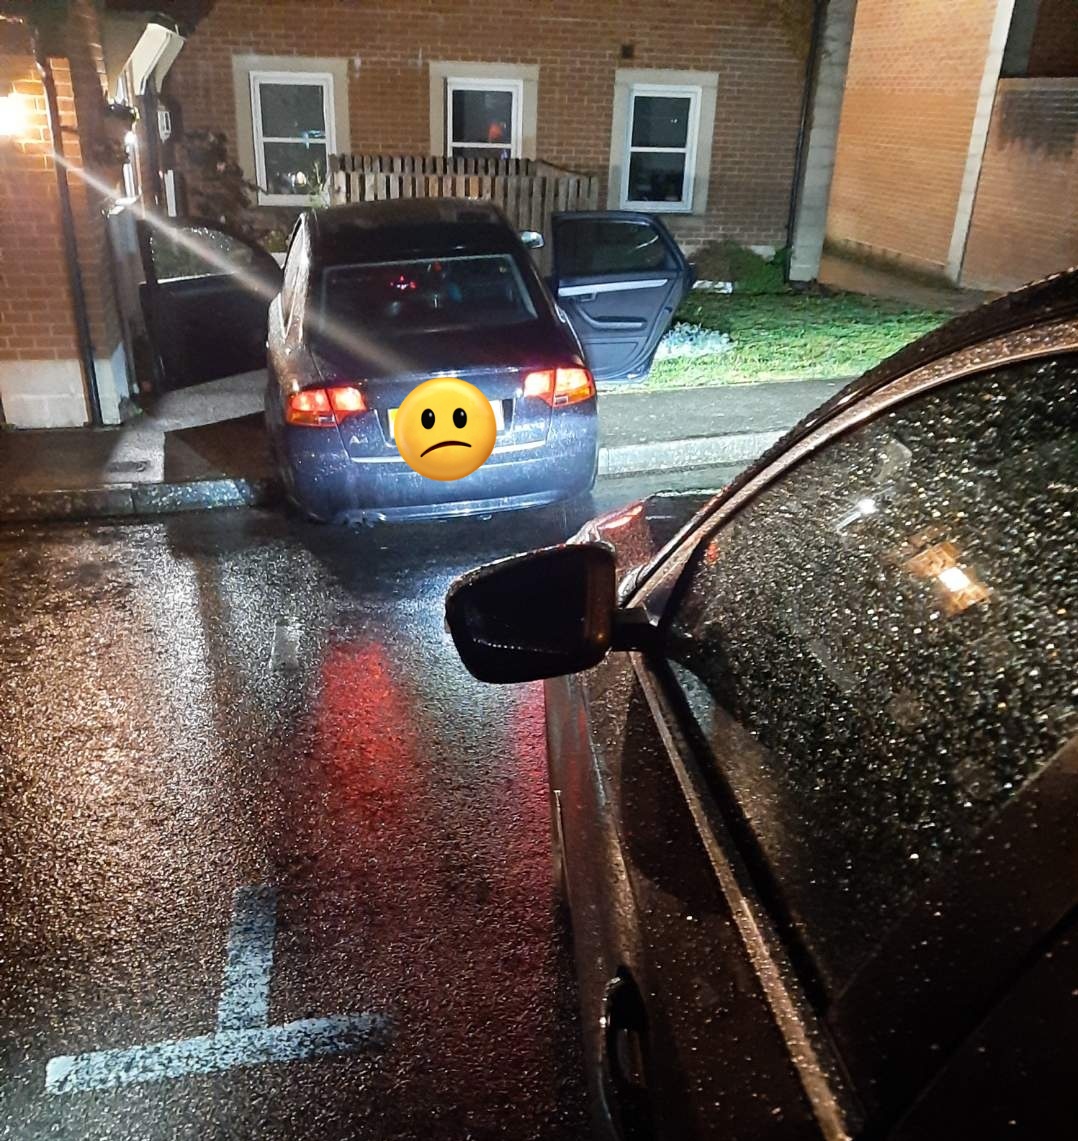 #RPU saw this vehicle being driven around Trowbridge at speed. We thought we'd have a chat, but the driver didn't want to talk. Following a short pursuit, the driver was #arrested at his home address for drink and drug driving and money laundering after we found £3k at the scene.